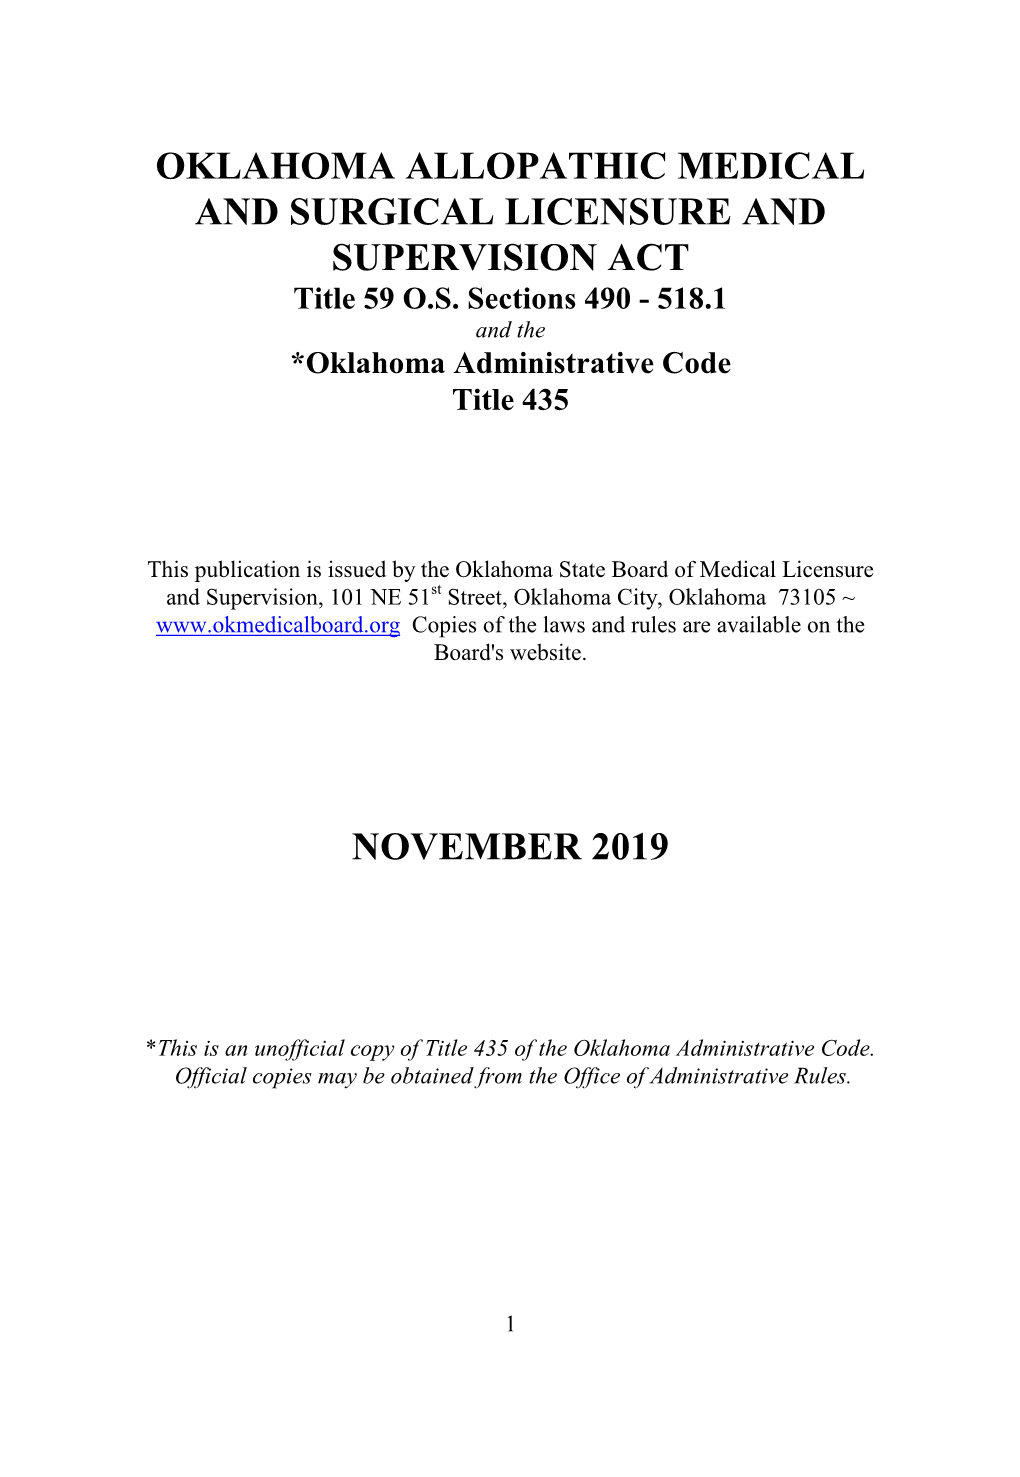 OKLAHOMA ALLOPATHIC MEDICAL and SURGICAL LICENSURE and SUPERVISION ACT Title 59 O.S